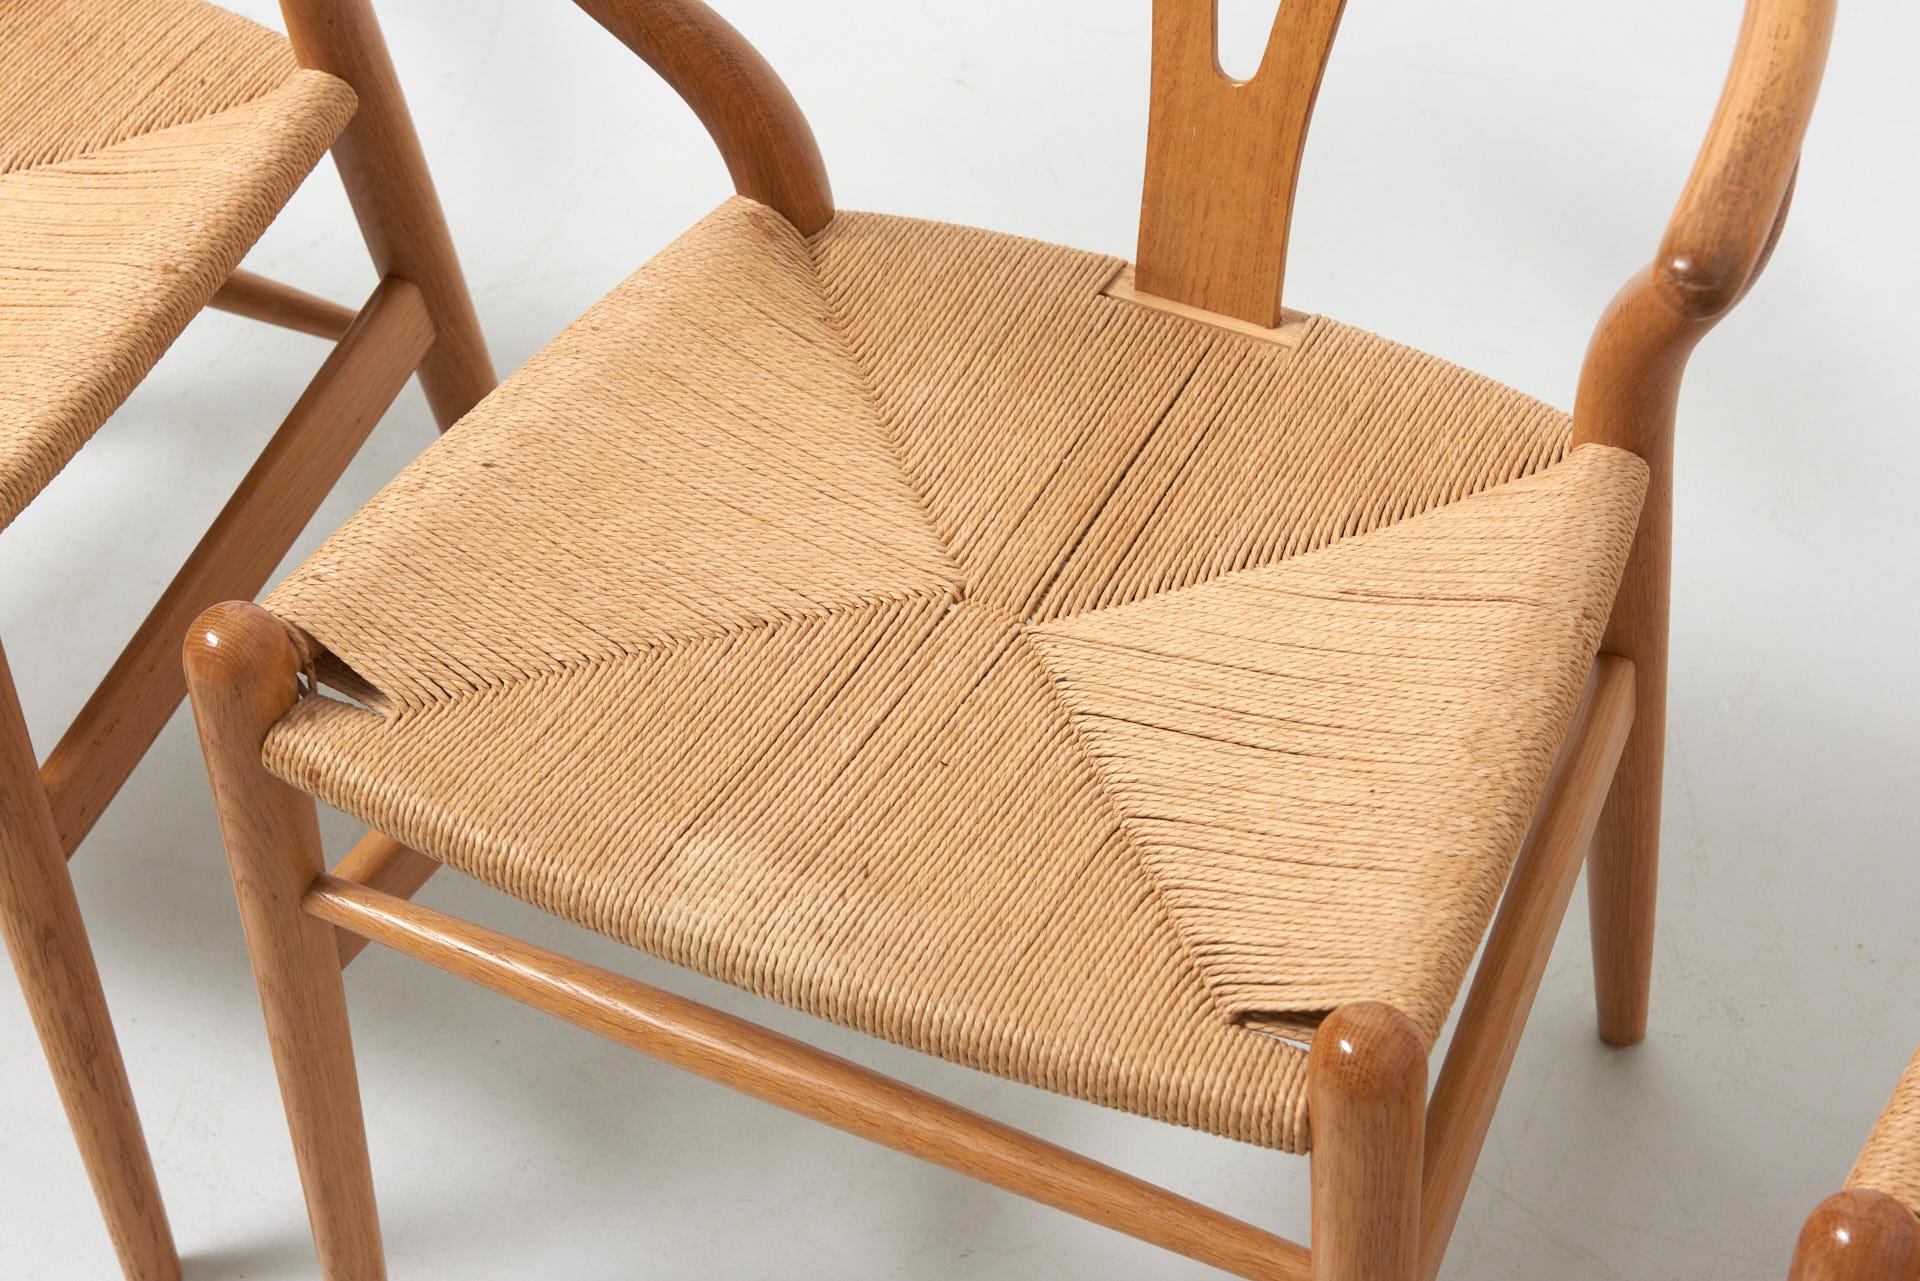 Lacquered 4 'Wishbone' Chairs in Oak Ch24 by Hans Wegner for Carl Hansen